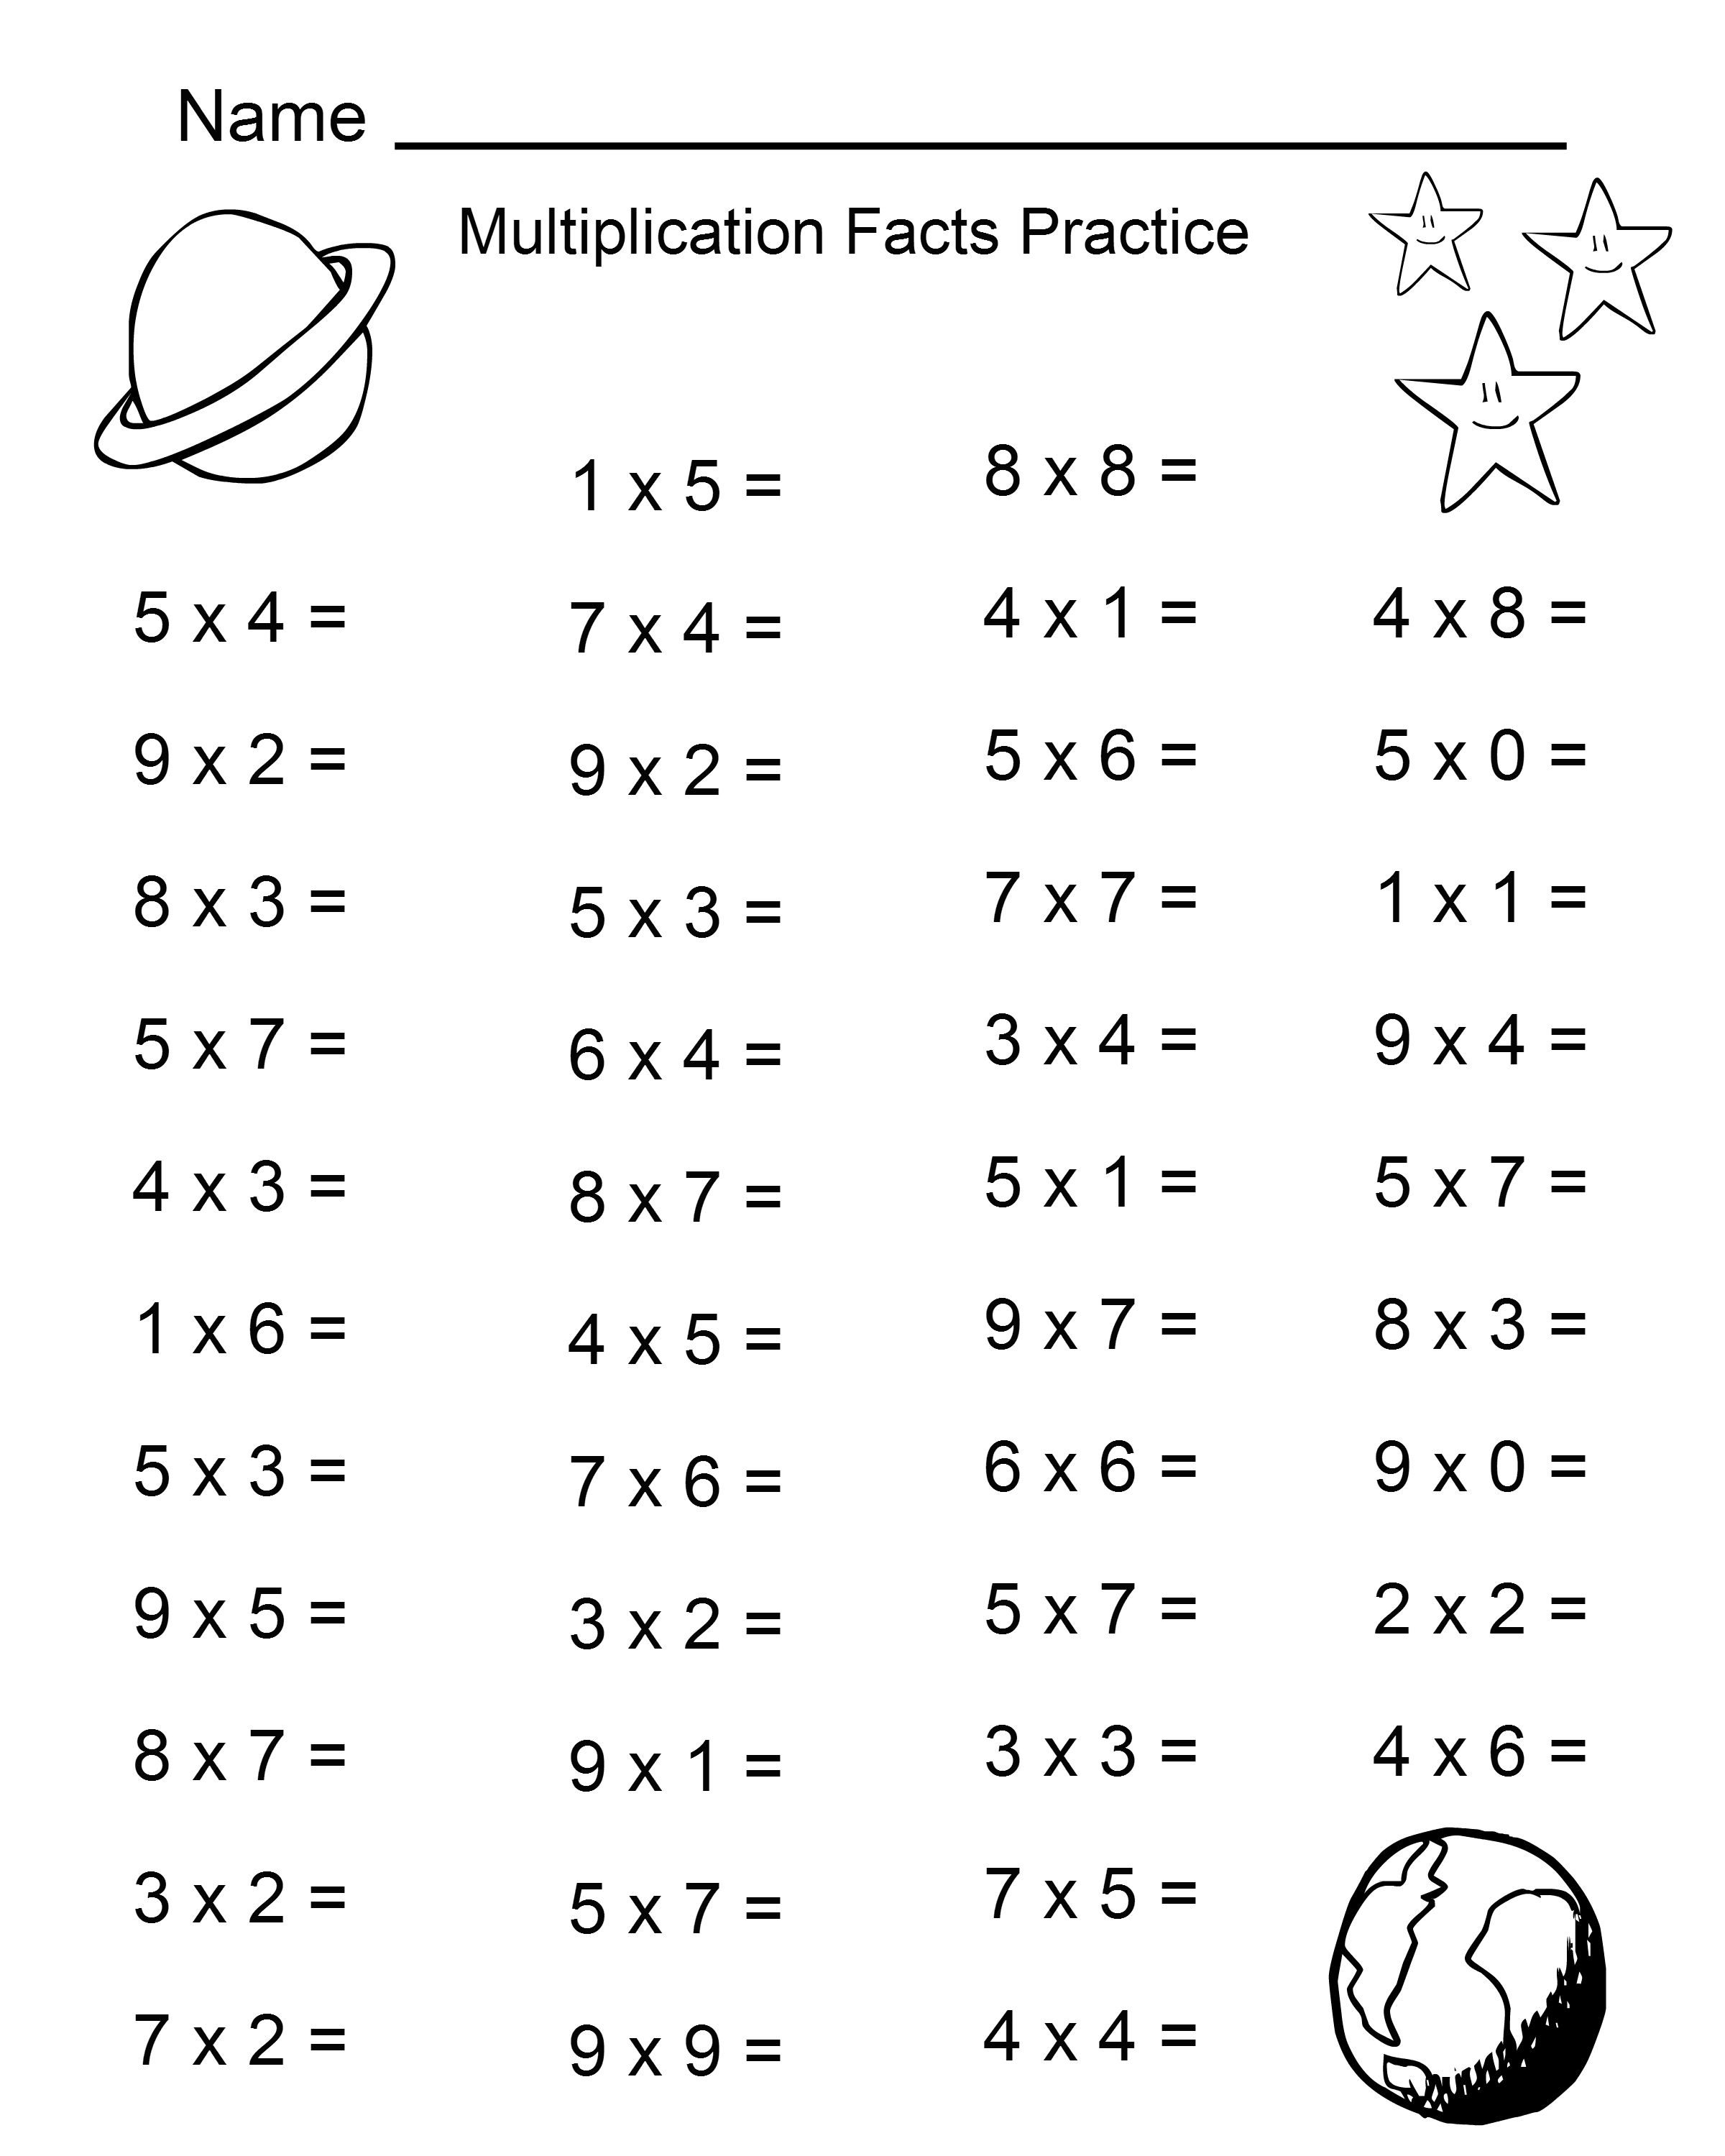 4th-grade-math-worksheets-best-coloring-pages-for-kids